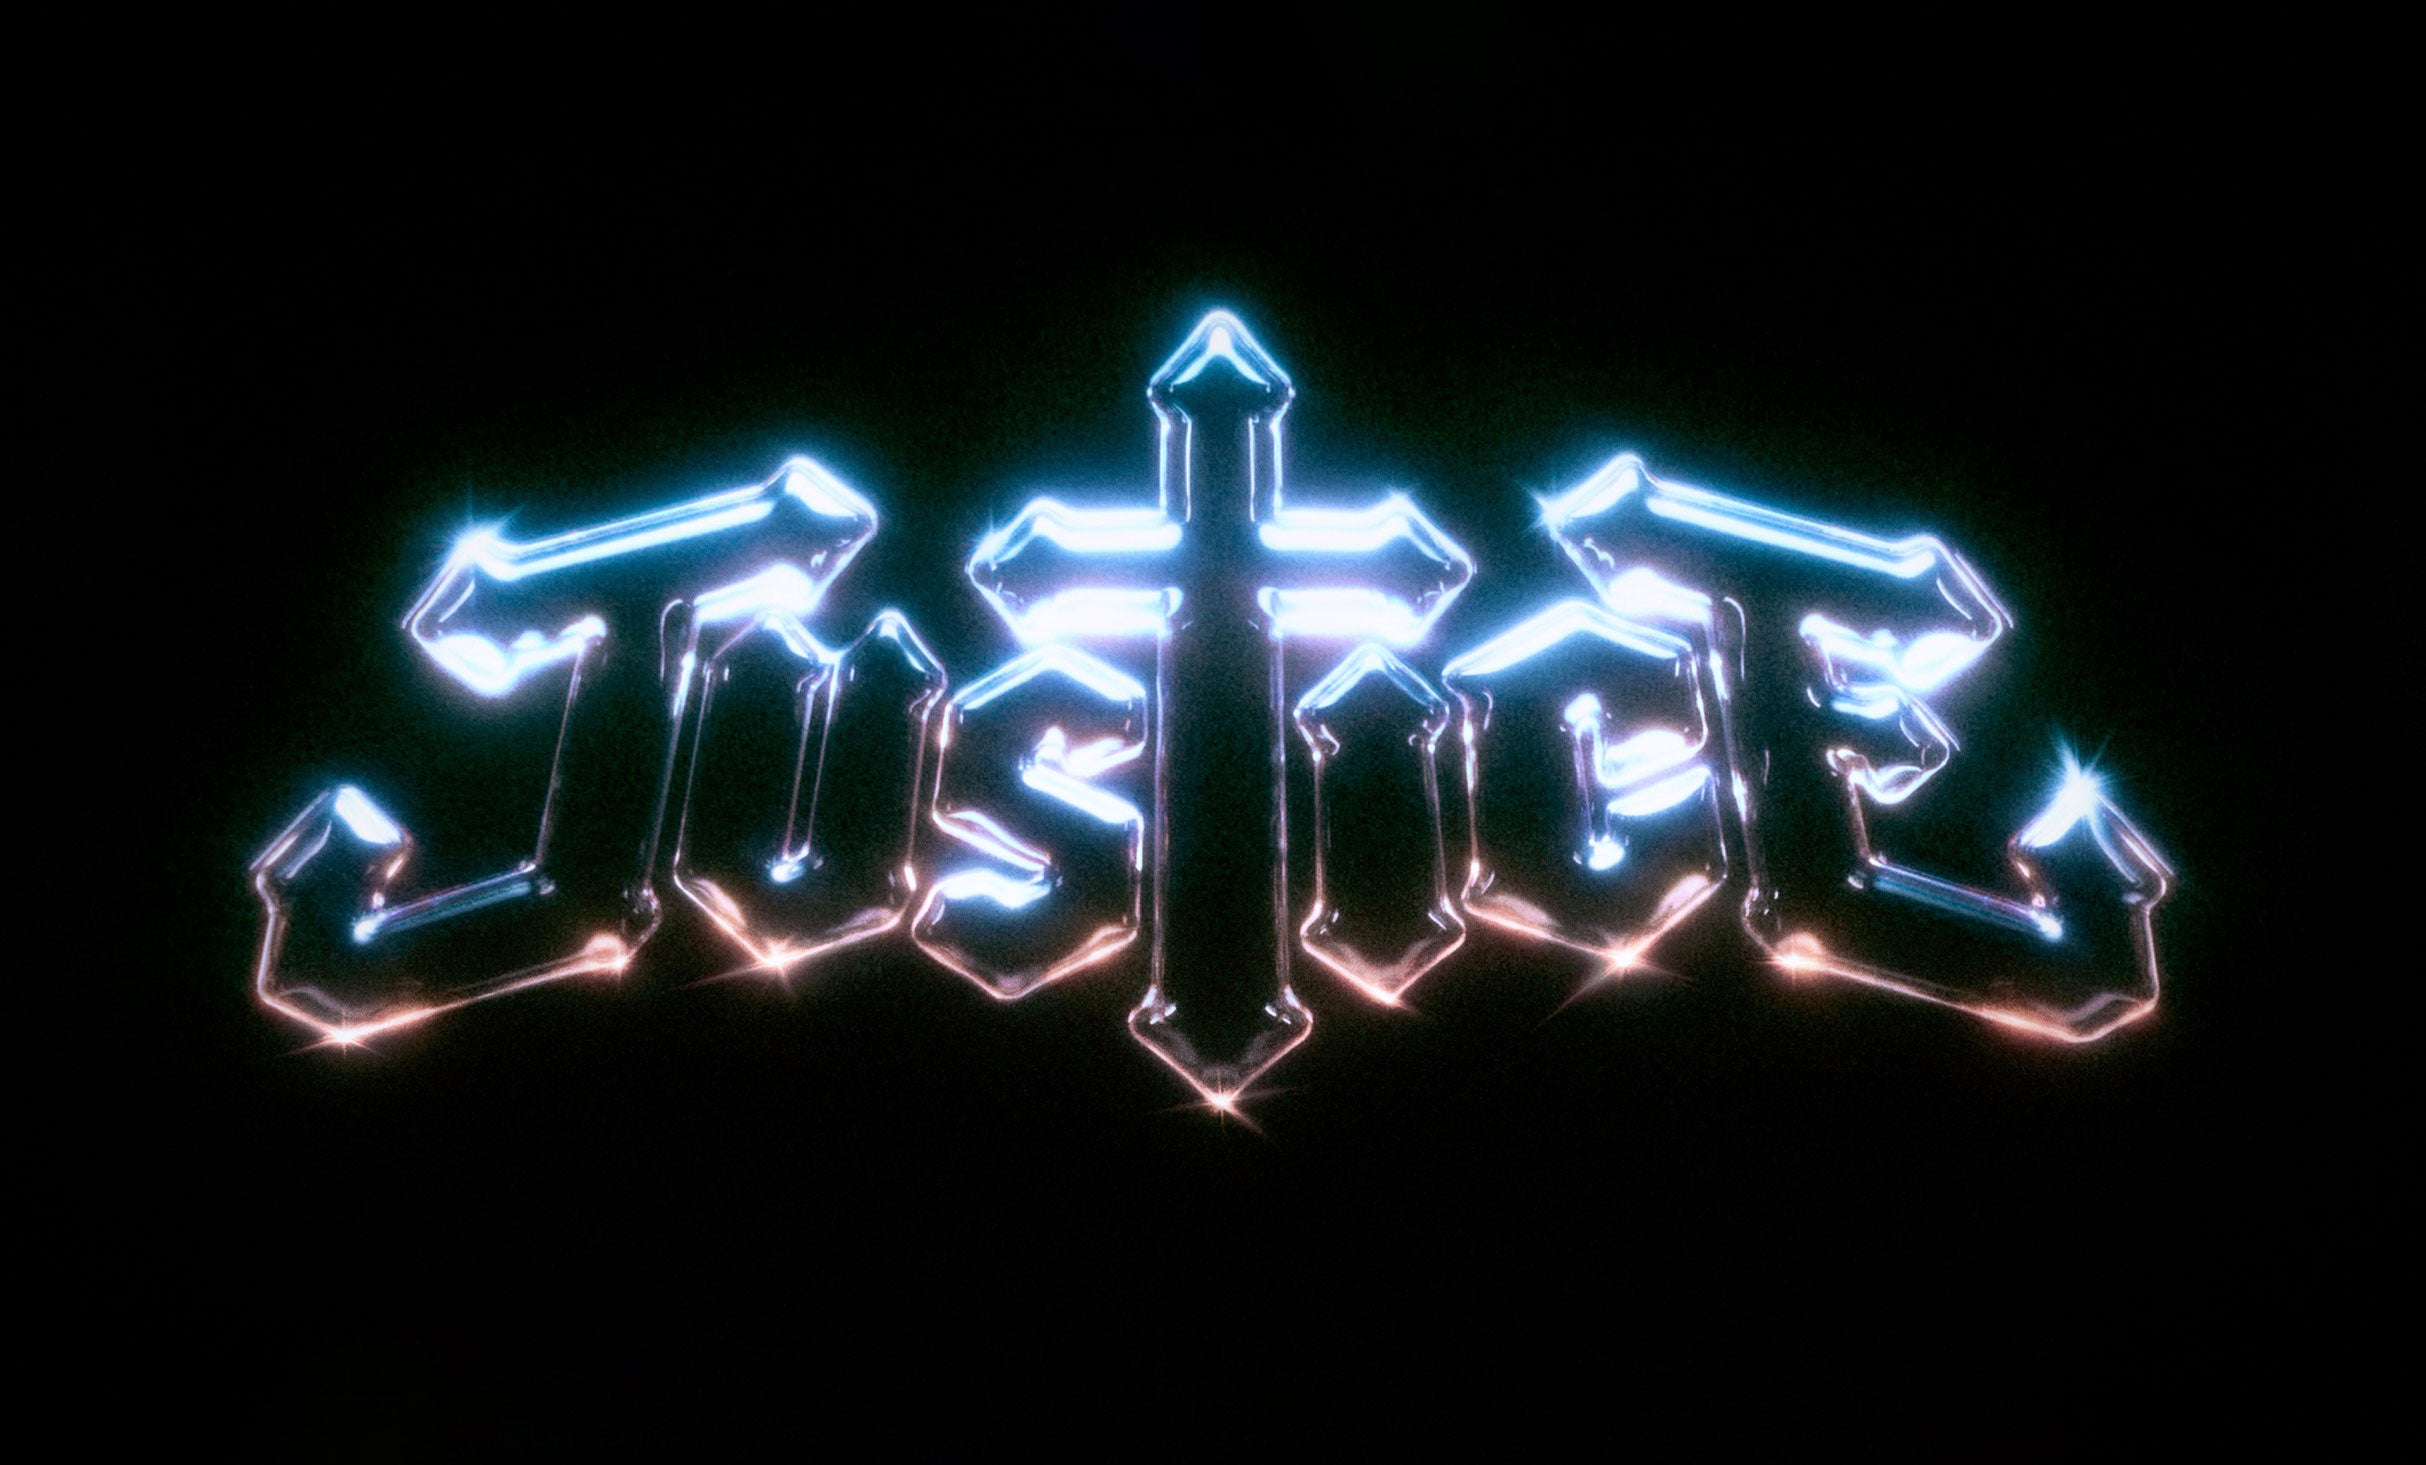 Justice: Live presale code for real tickets in Hollywood